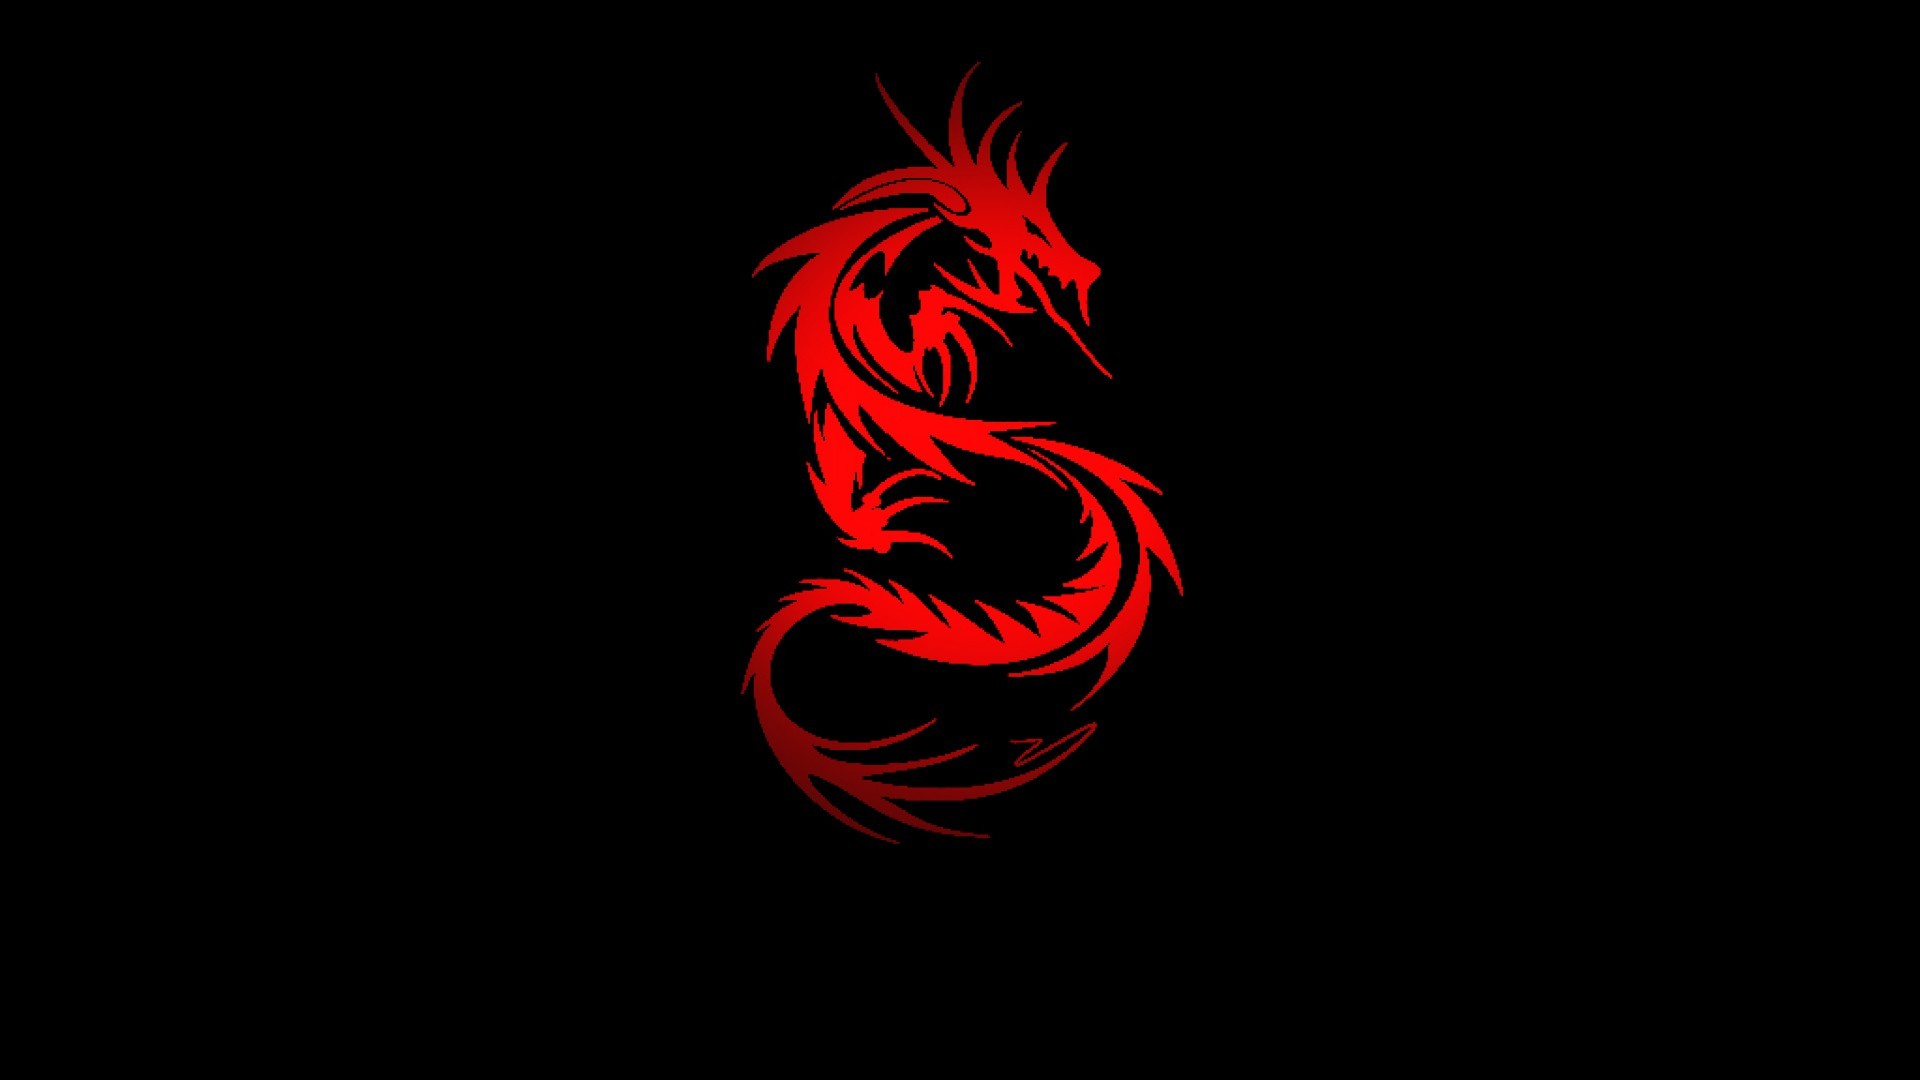 Red Dragon wallpapers HD free – 562608